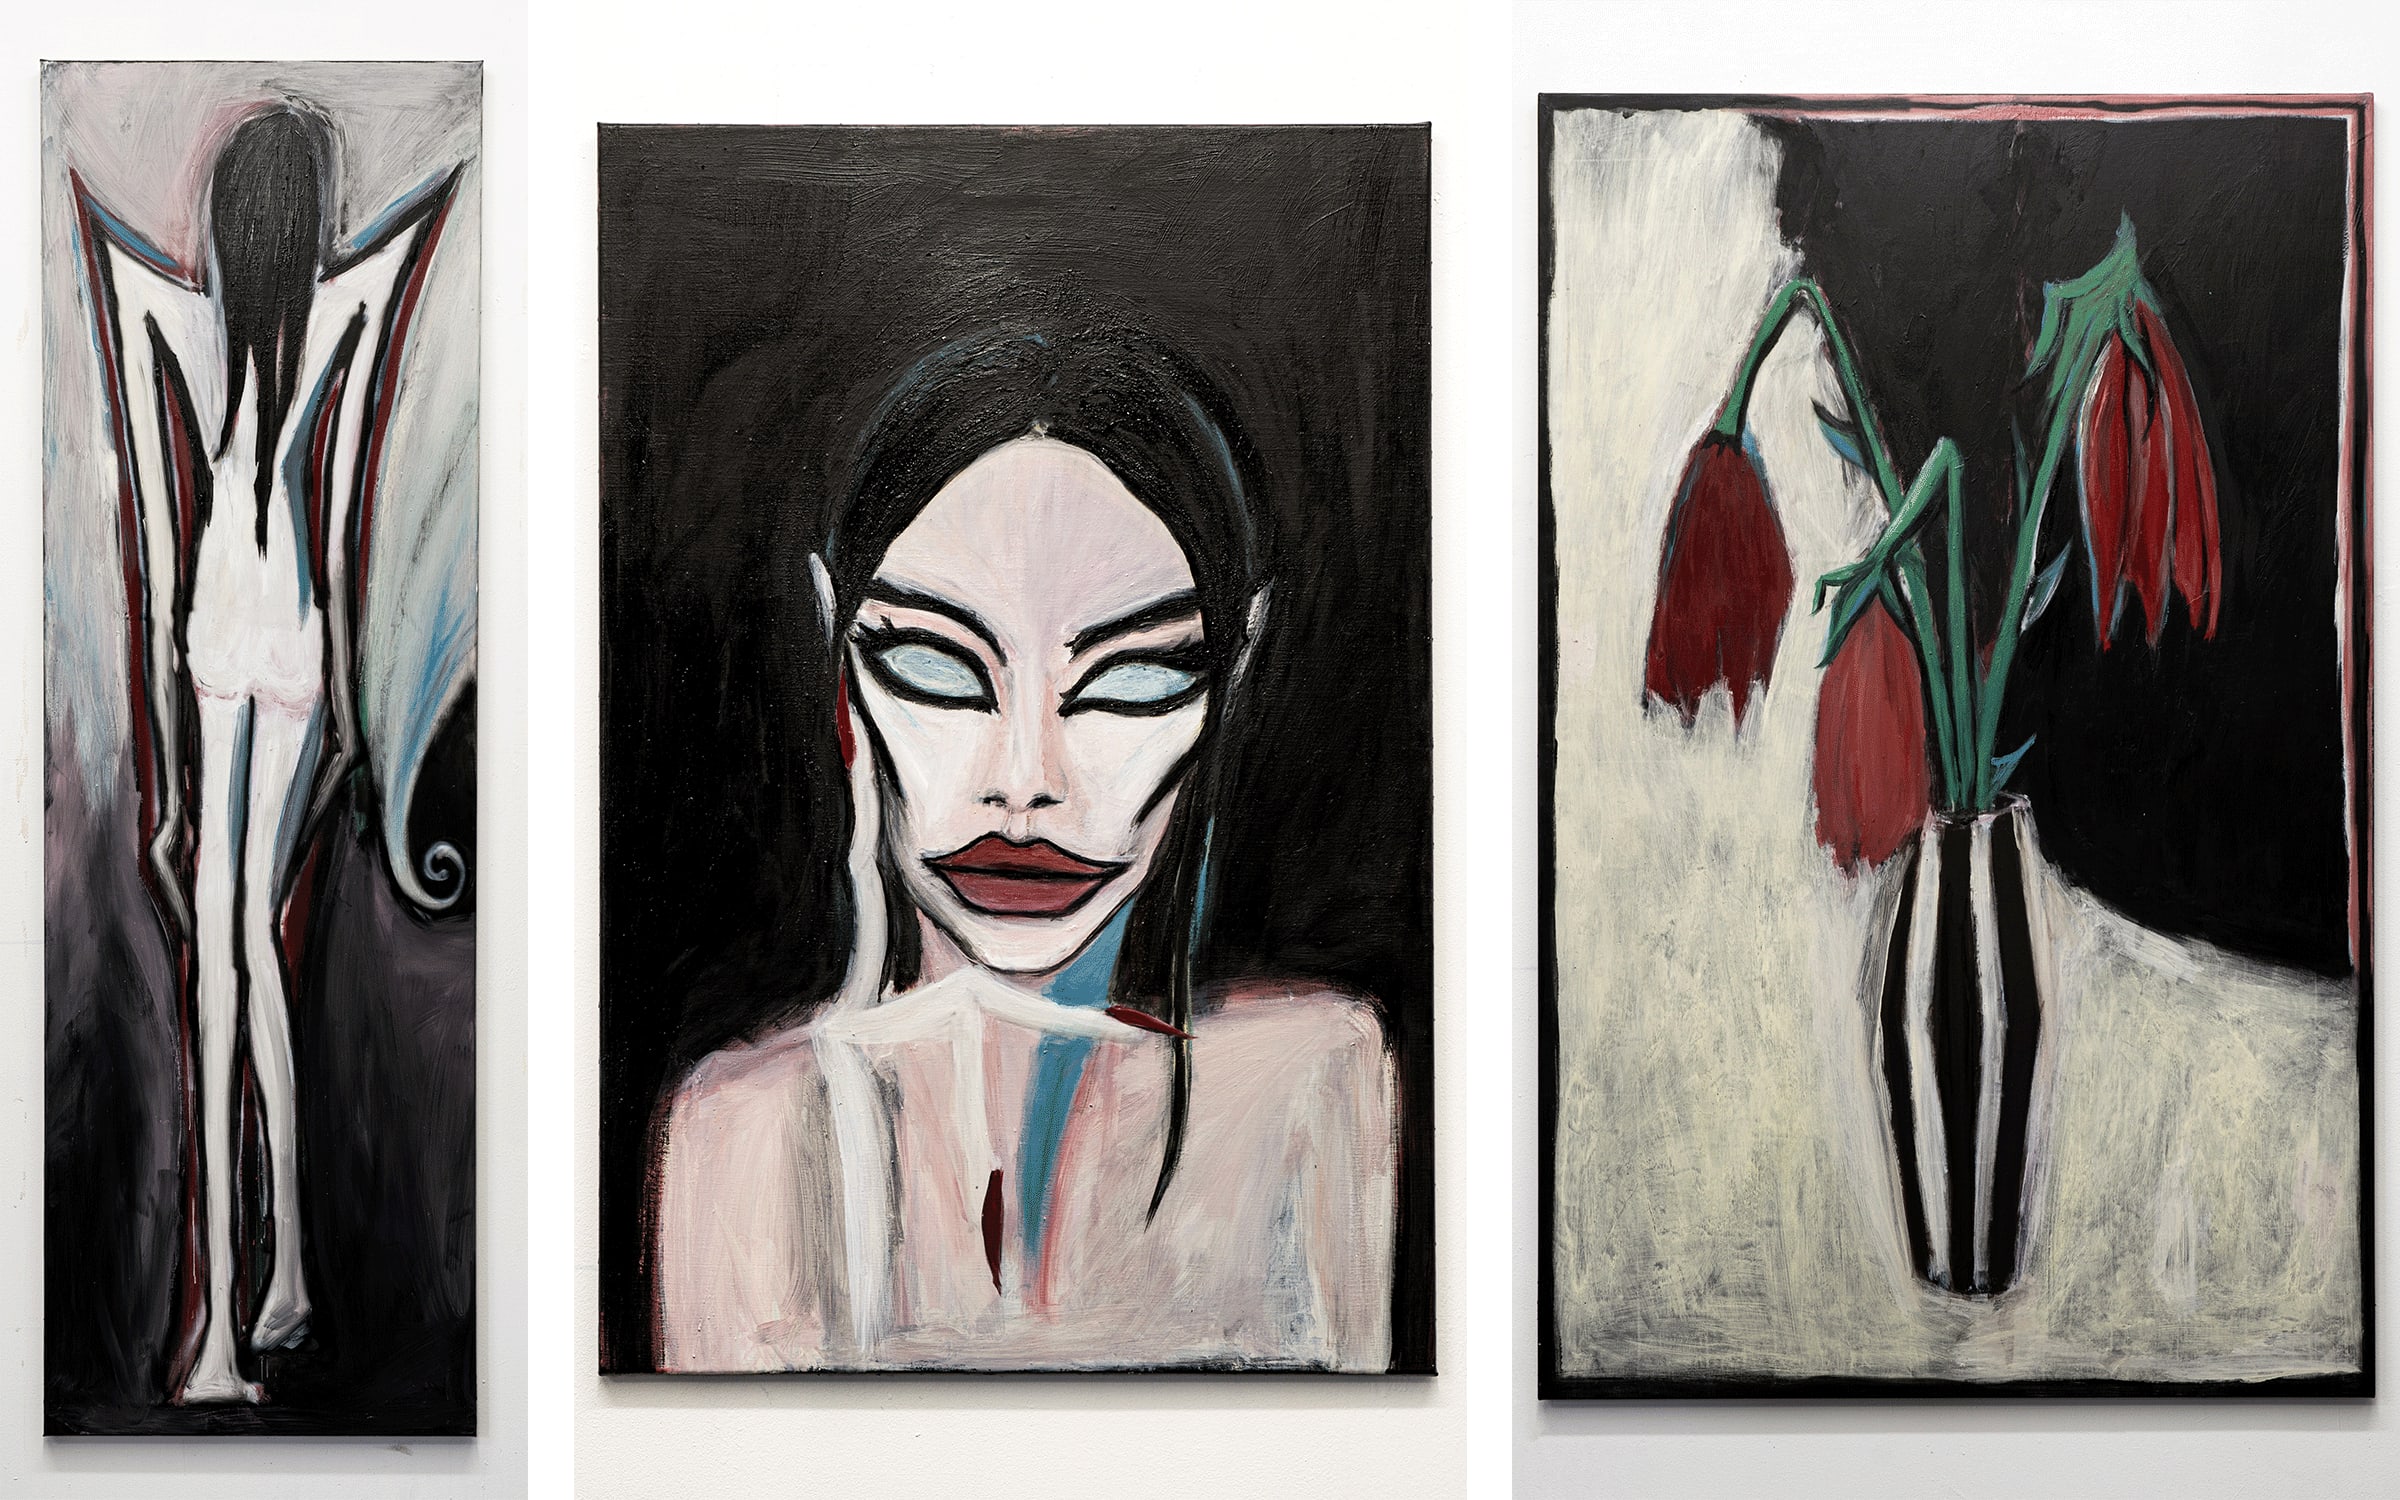 Artworks by Tobias Spichtig. Courtesy of Meredith Rosen Gallery. From left to right: 1. Nude Leaving, 2023. 2. Michella (poem), 2023. 3. Flowers in a vase, 2023.